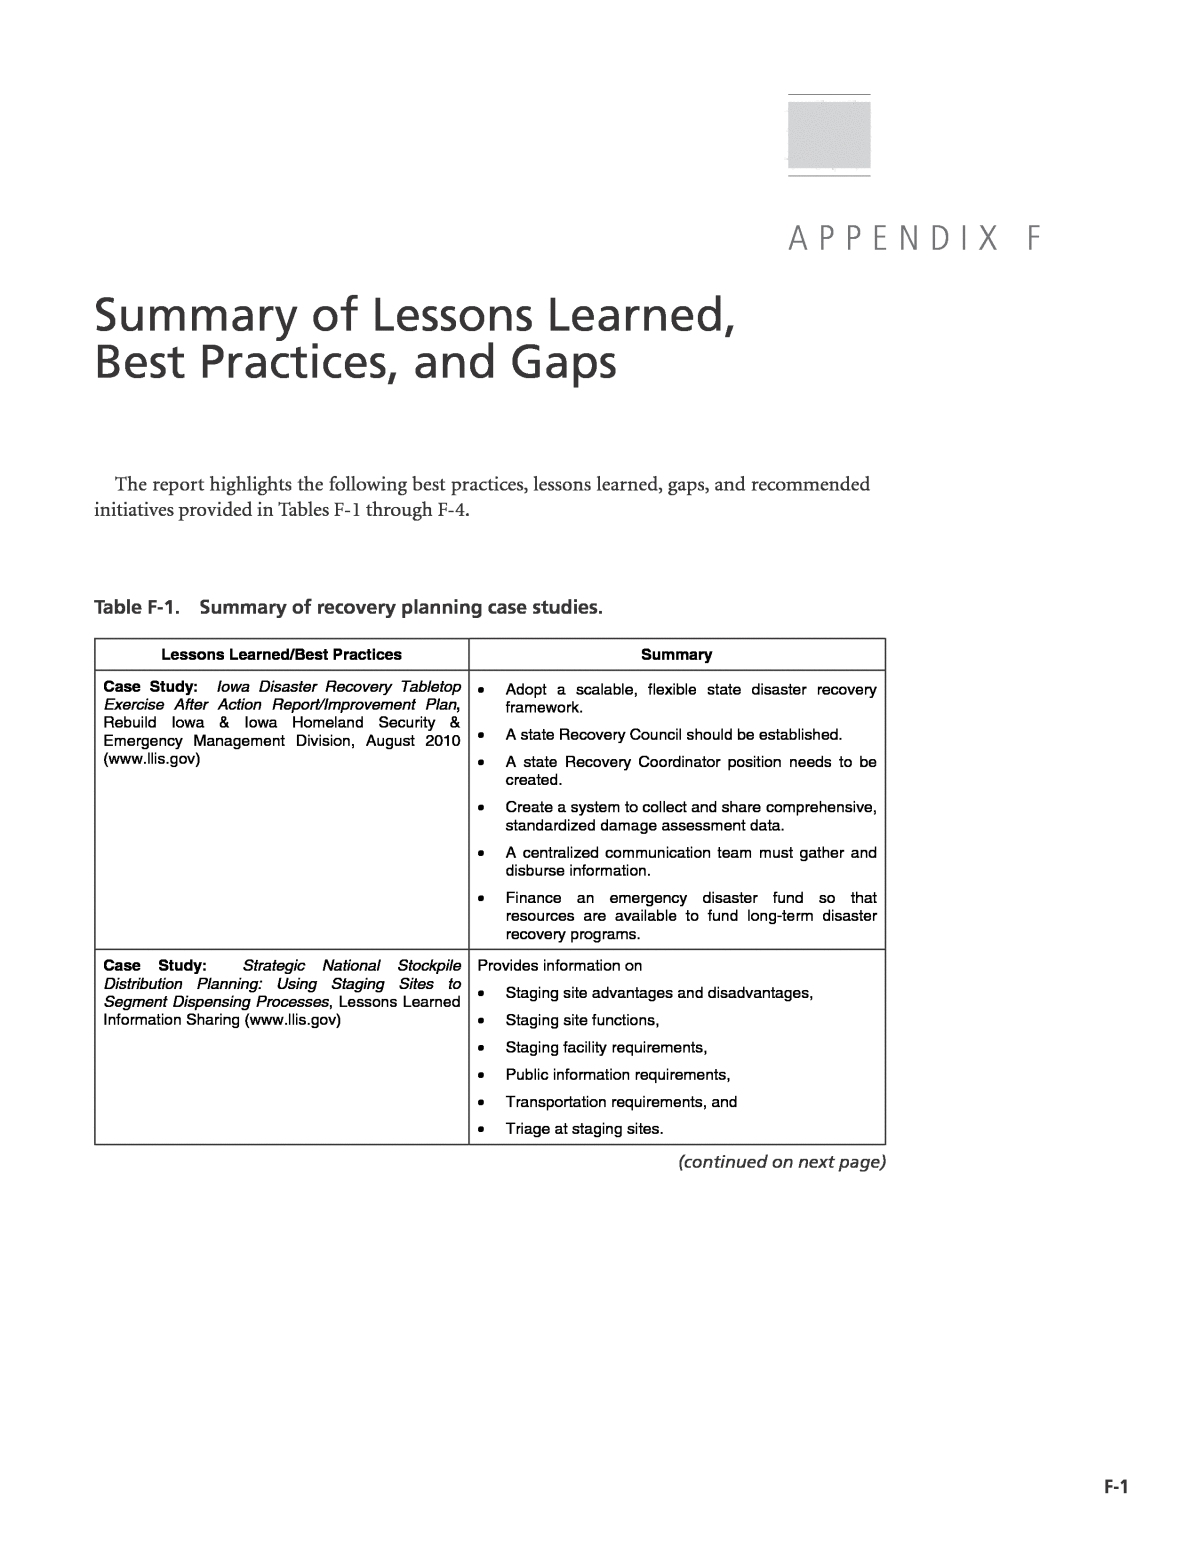 Appendix F - Summary of Lessons Learned, Best Practices, and Gaps